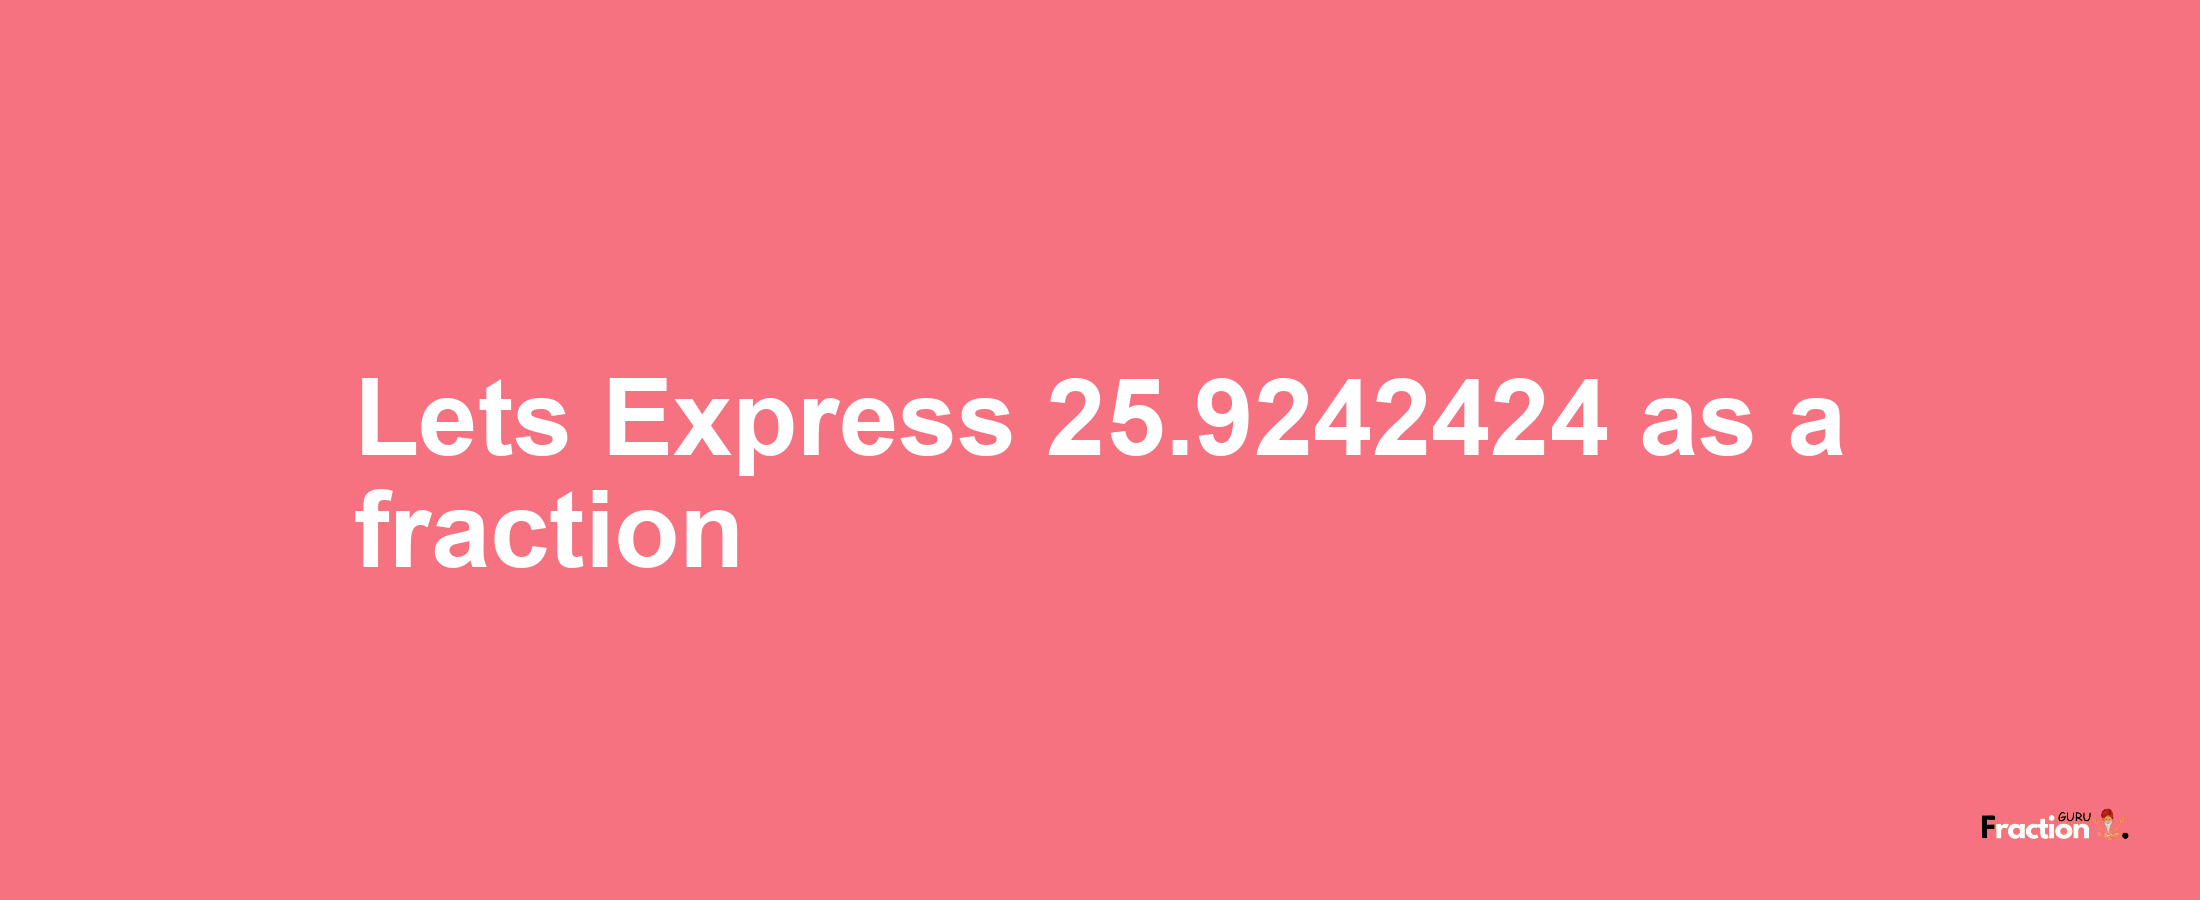 Lets Express 25.9242424 as afraction